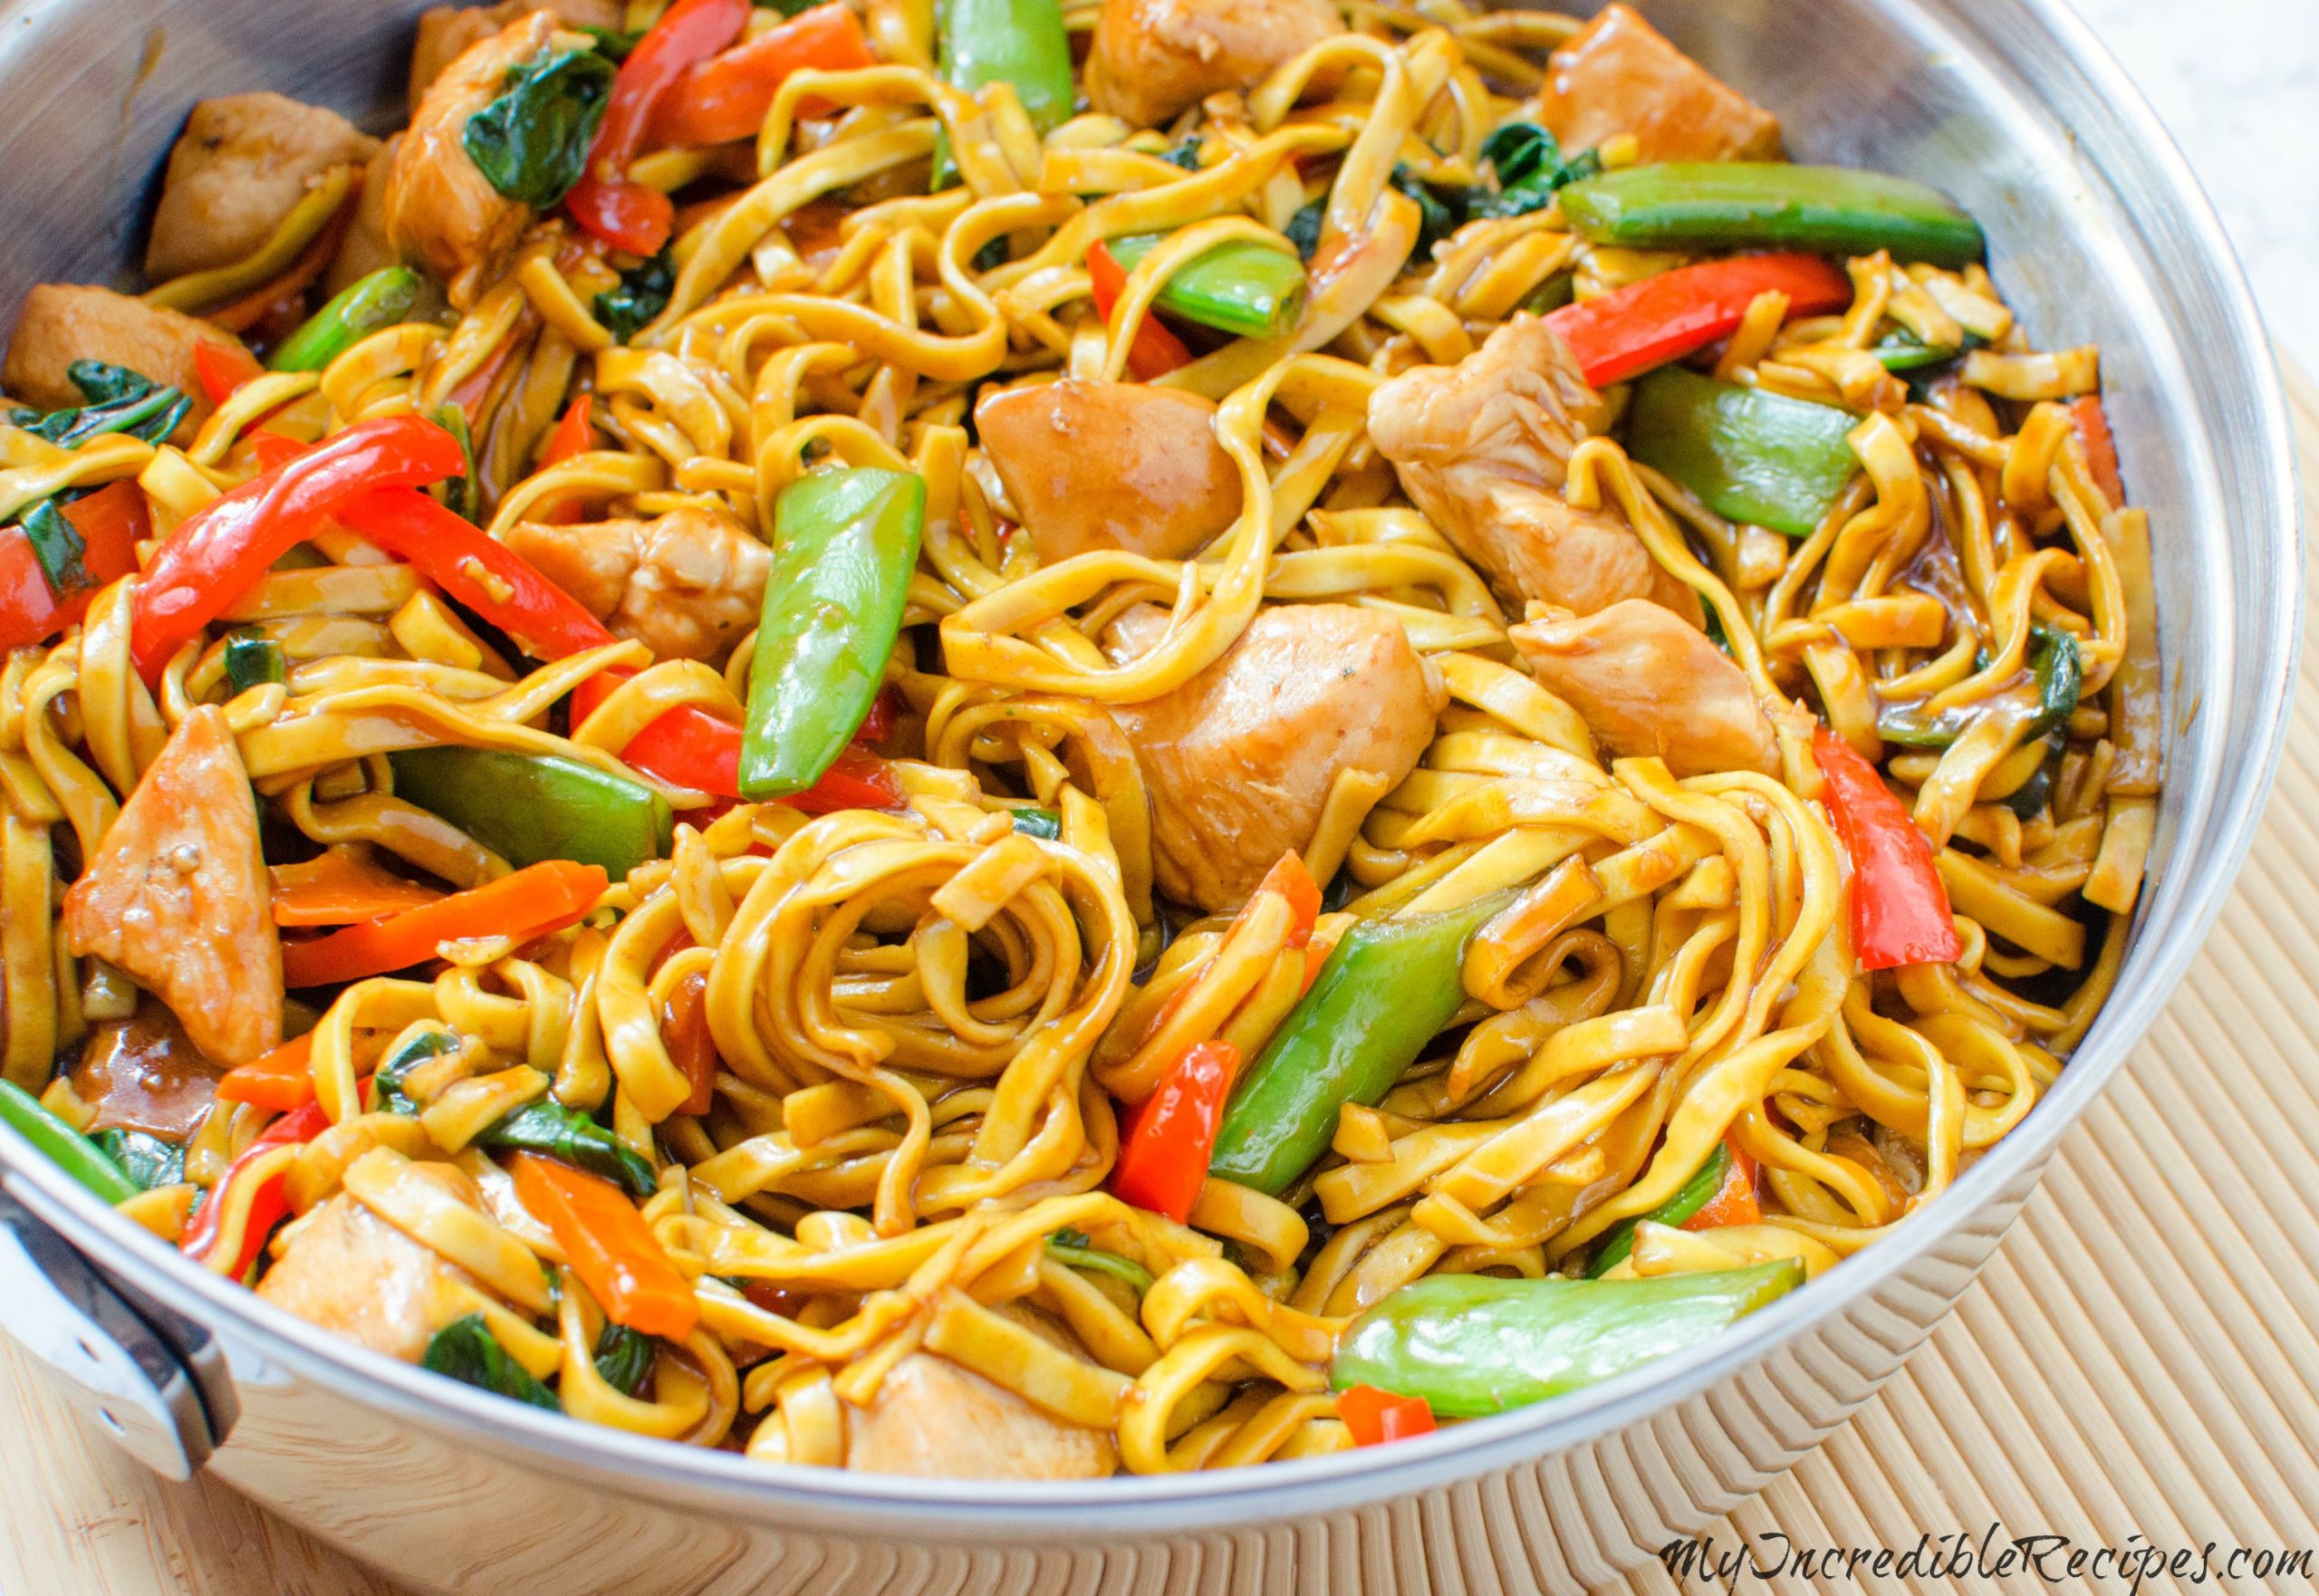 Homemade Lo Mein Noodles
 Chicken Lo Mein – Homemade Takeout Style